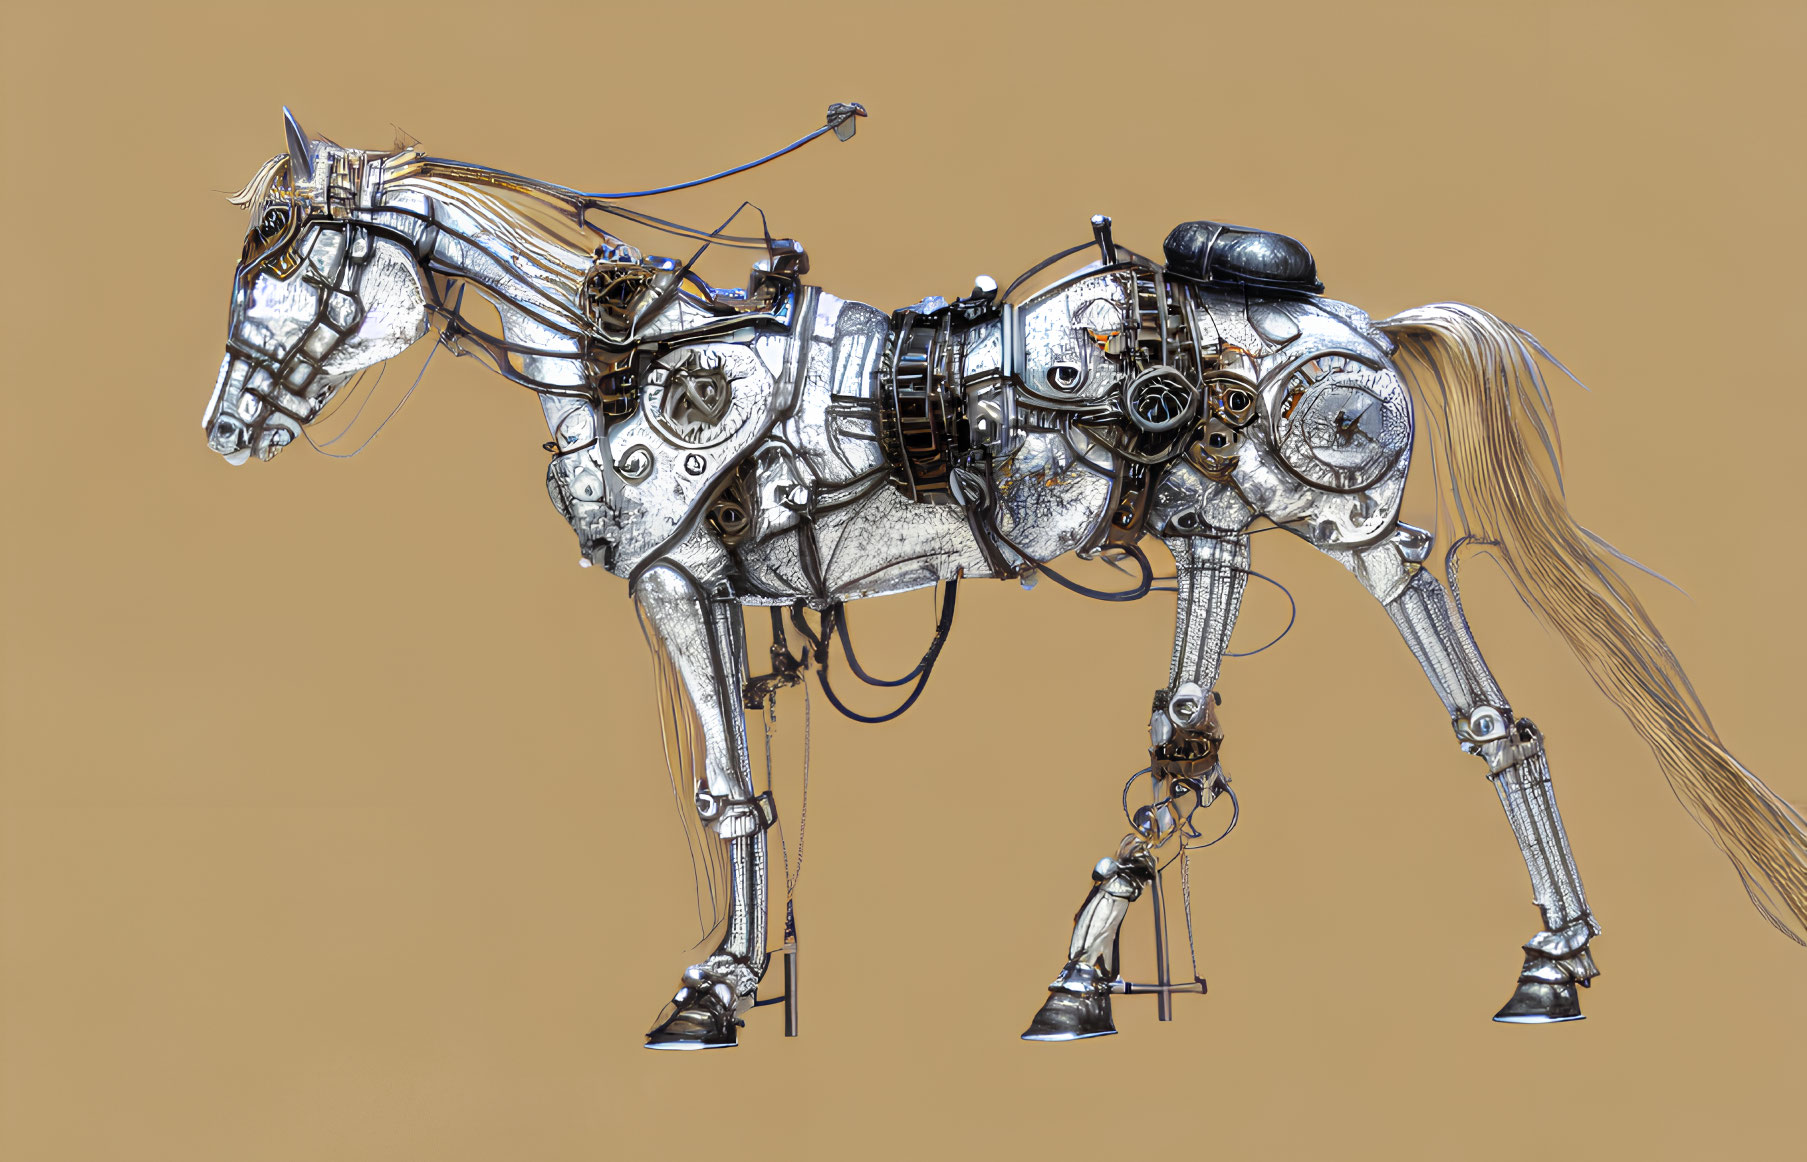 Detailed Mechanical Horse Illustration with Gears on Tan Background